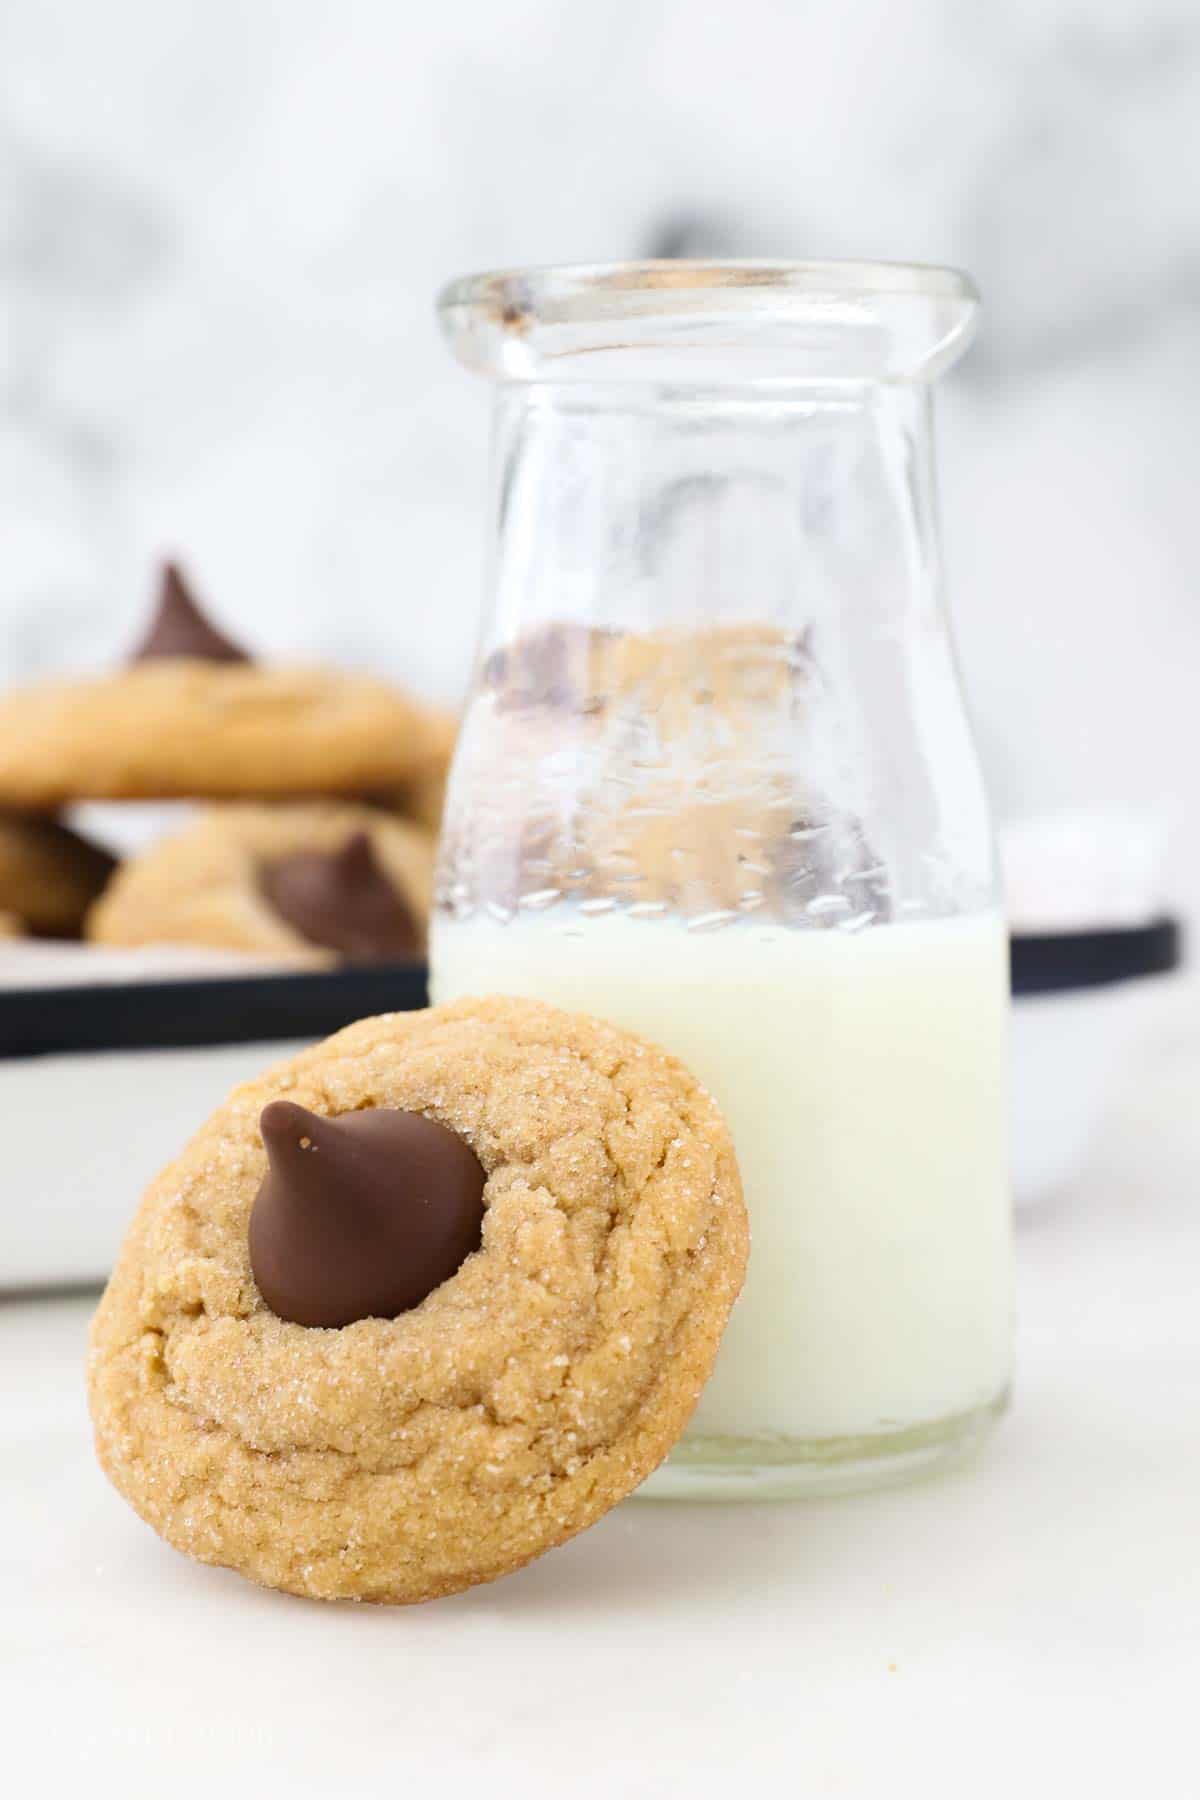 A Peanut Butter Kiss Cookie leaned up against a glass of milk.